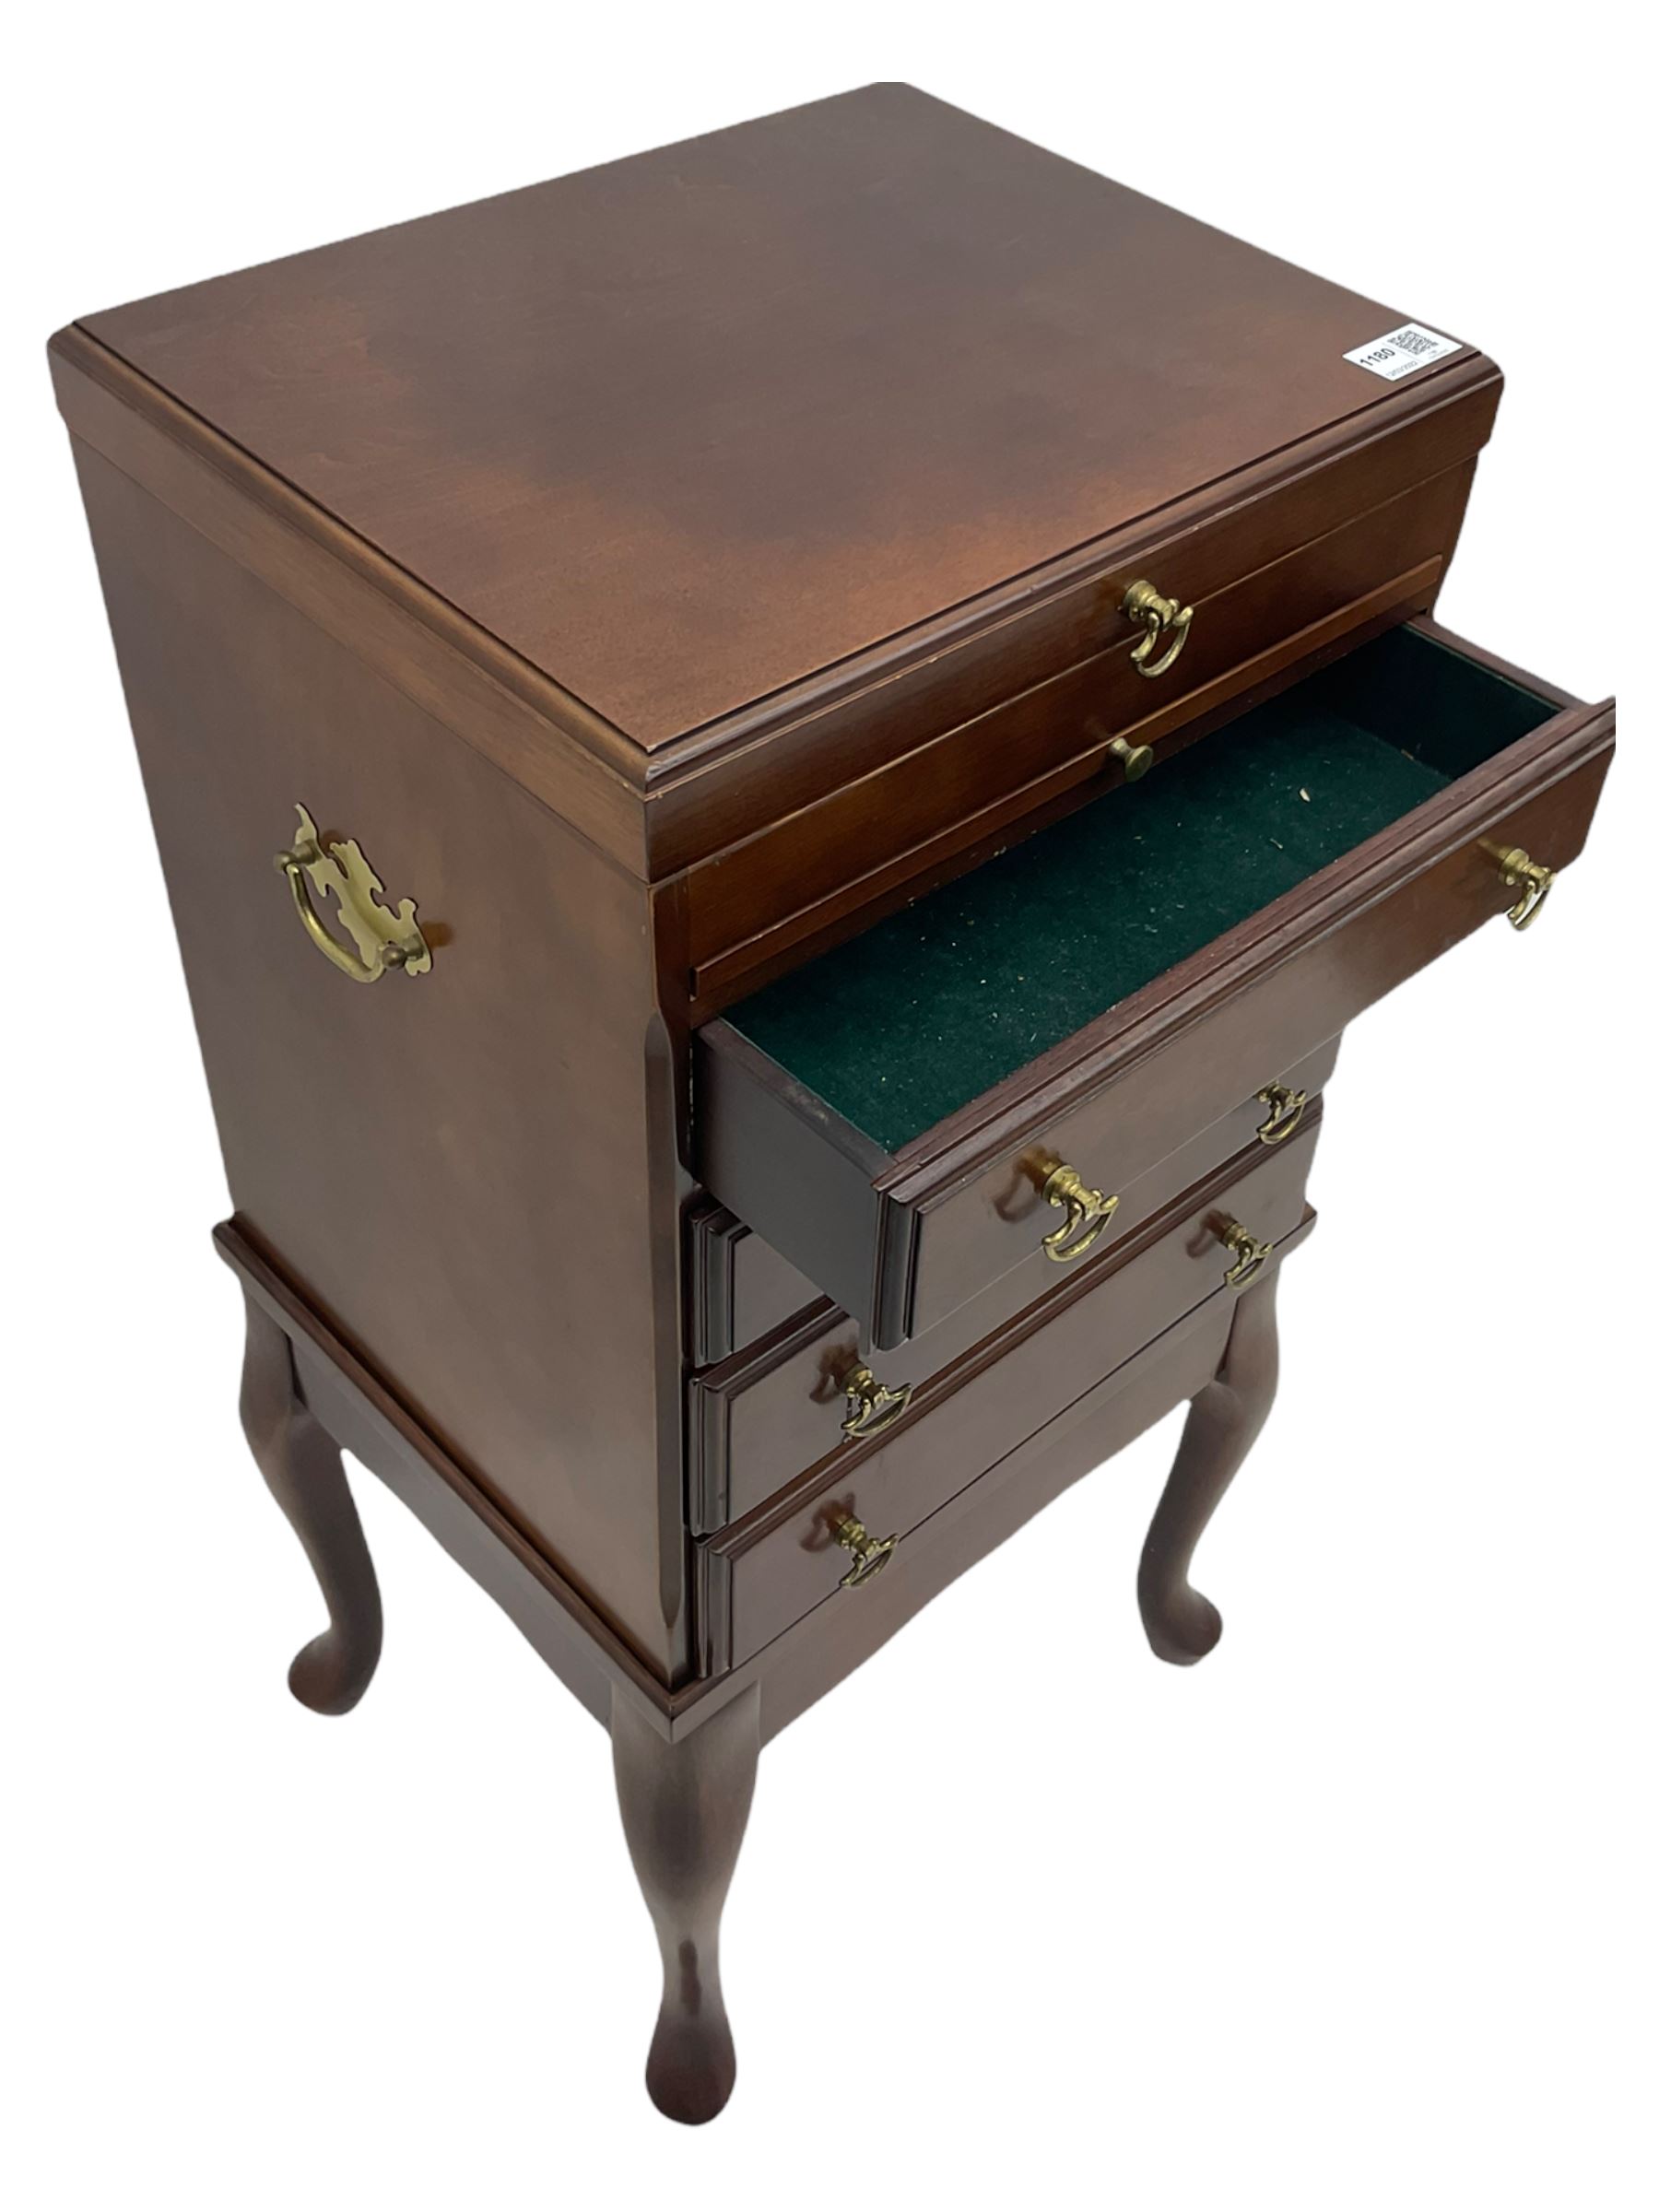 Mahogany pedestal chest on stand - Image 4 of 6